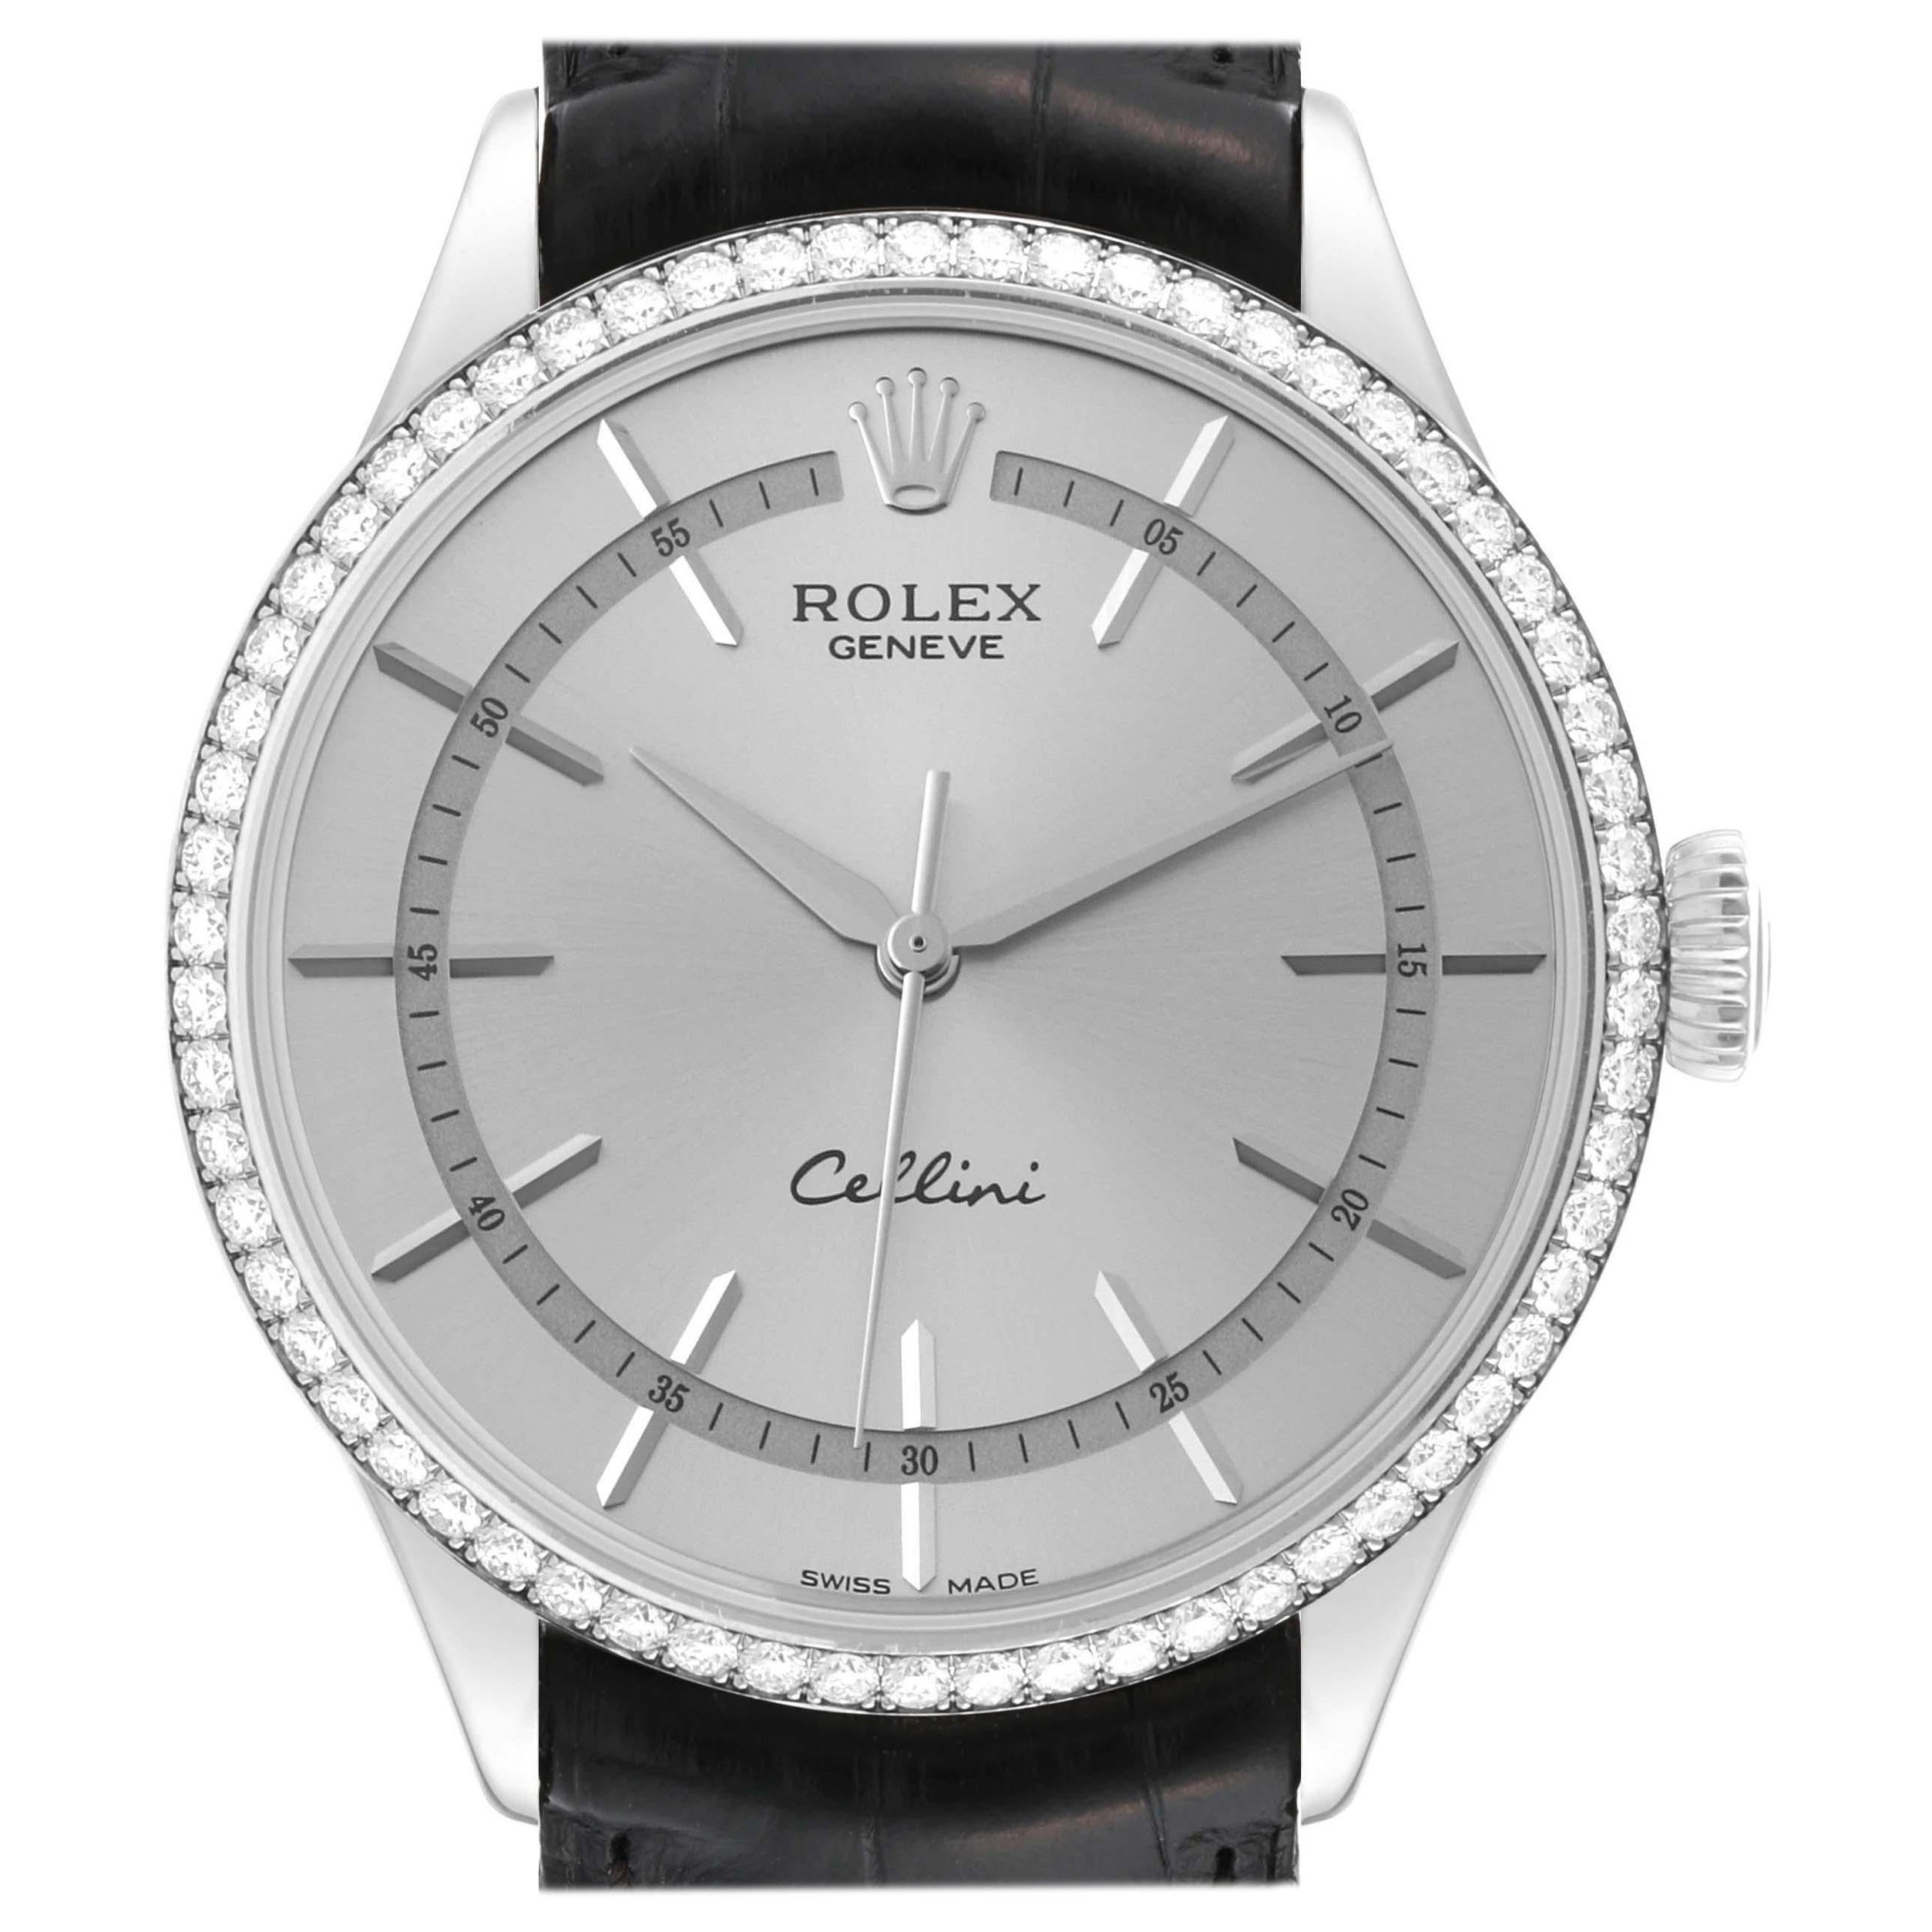 Rolex Cellini Time White Gold Diamond Automatic Mens Watch 50709 Box Card For Sale